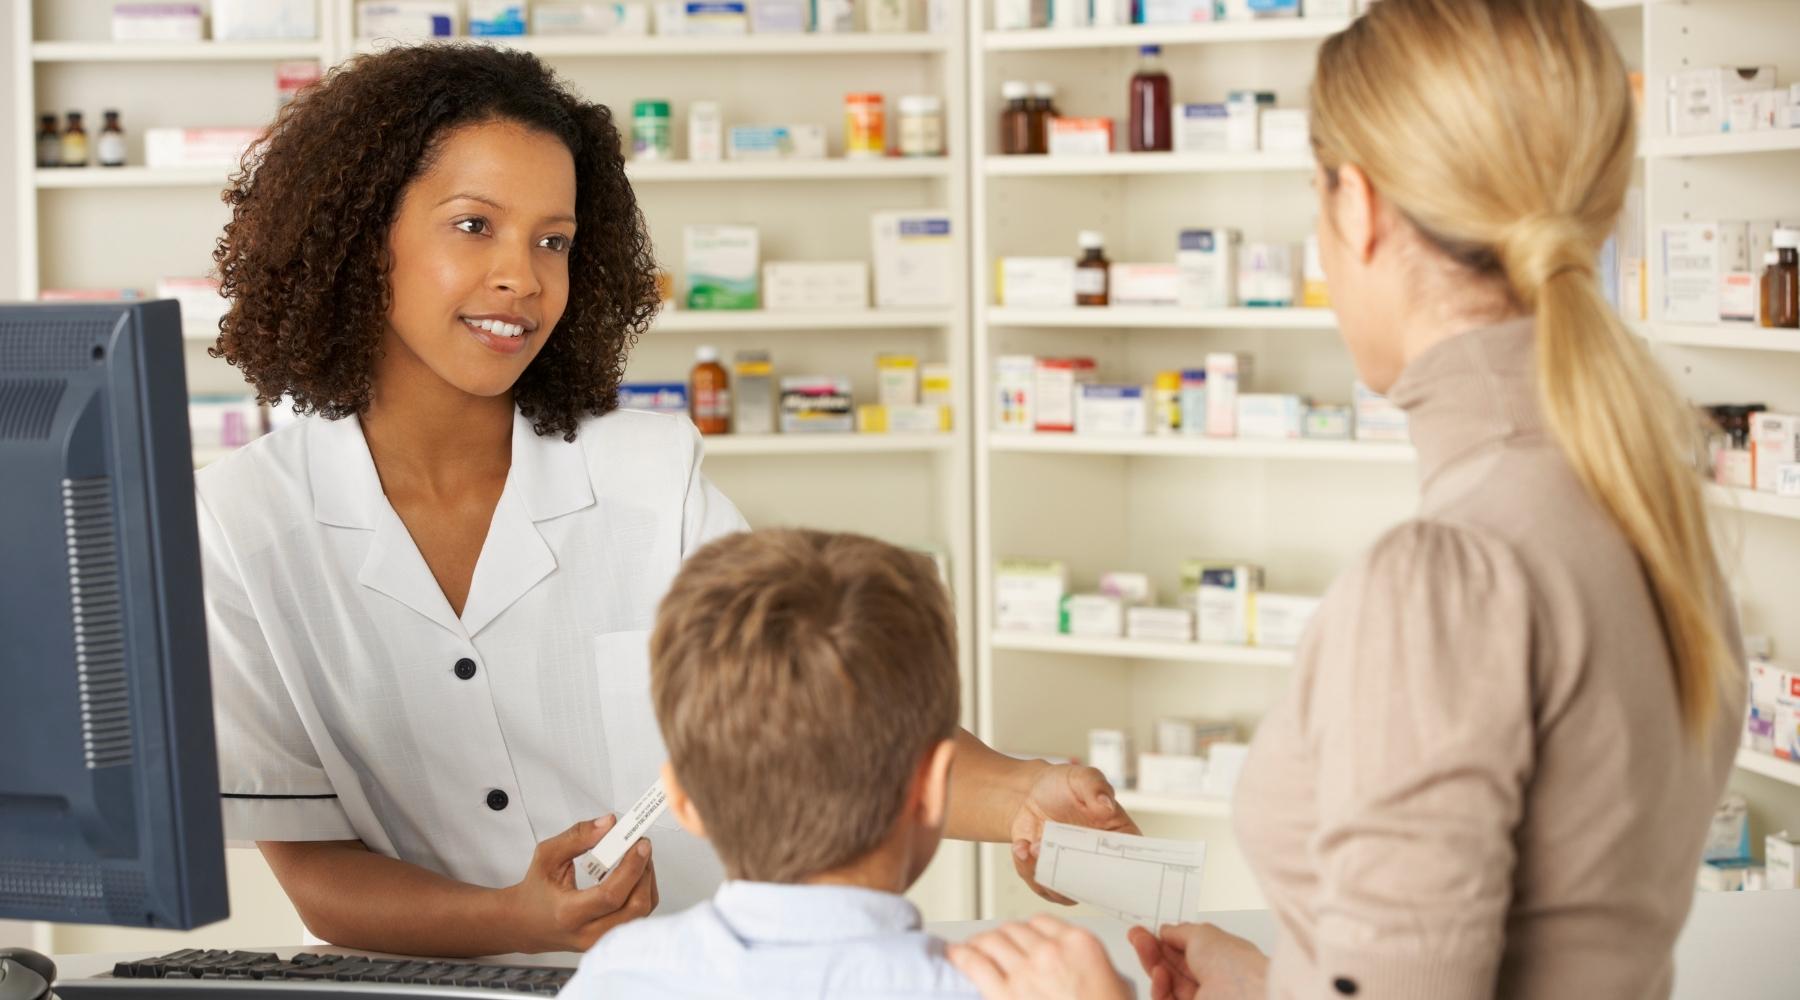 Pharmacists will be able to Prescribe Medications for Minor Ailments in the New Year